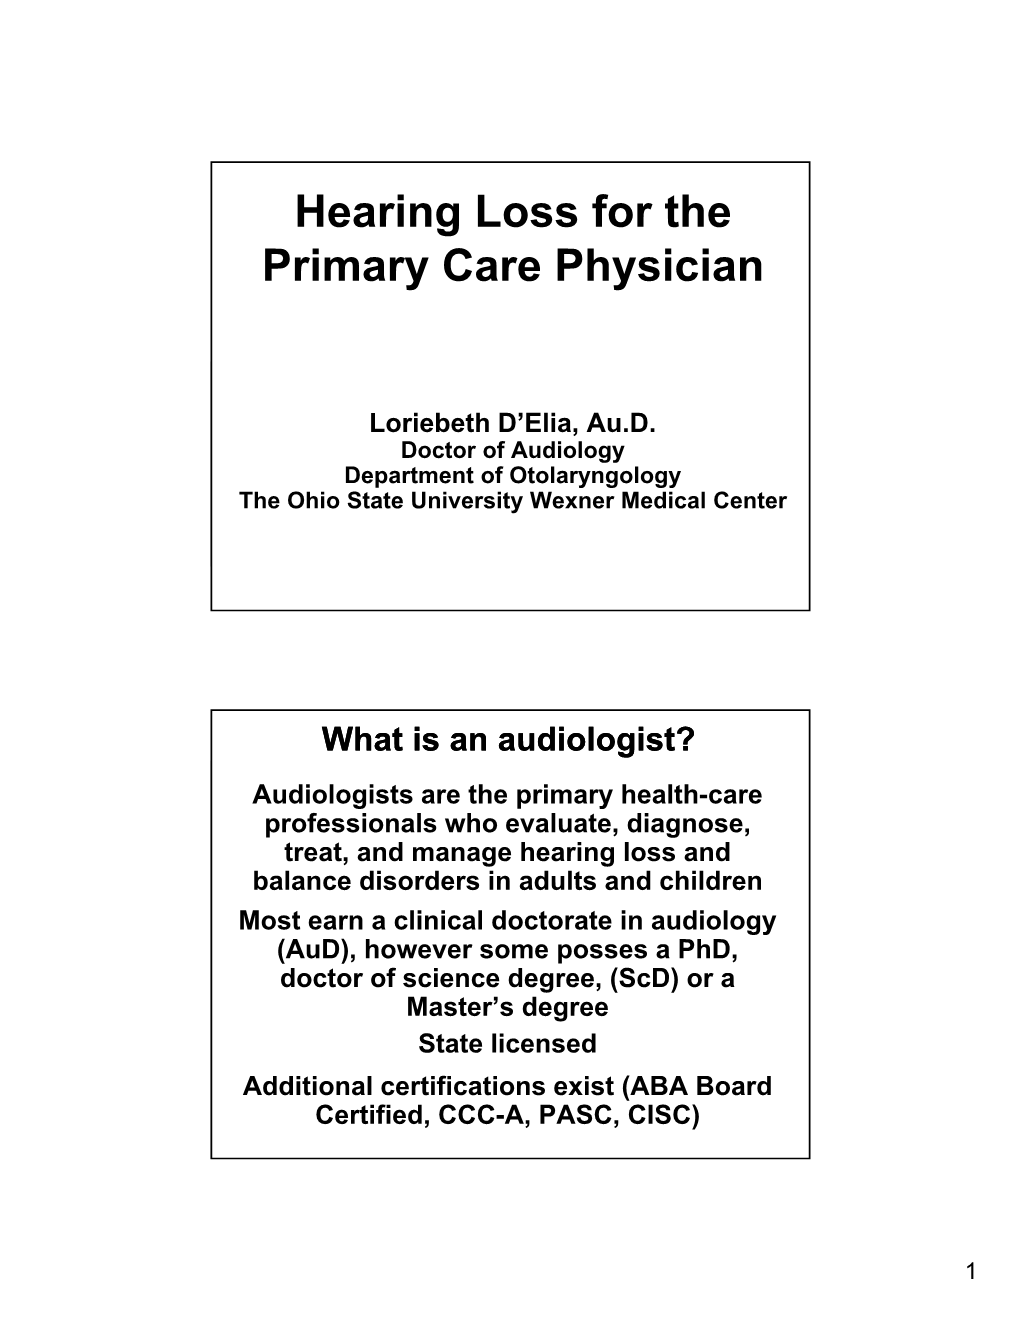 Hearing Loss for the Primary Care Physician